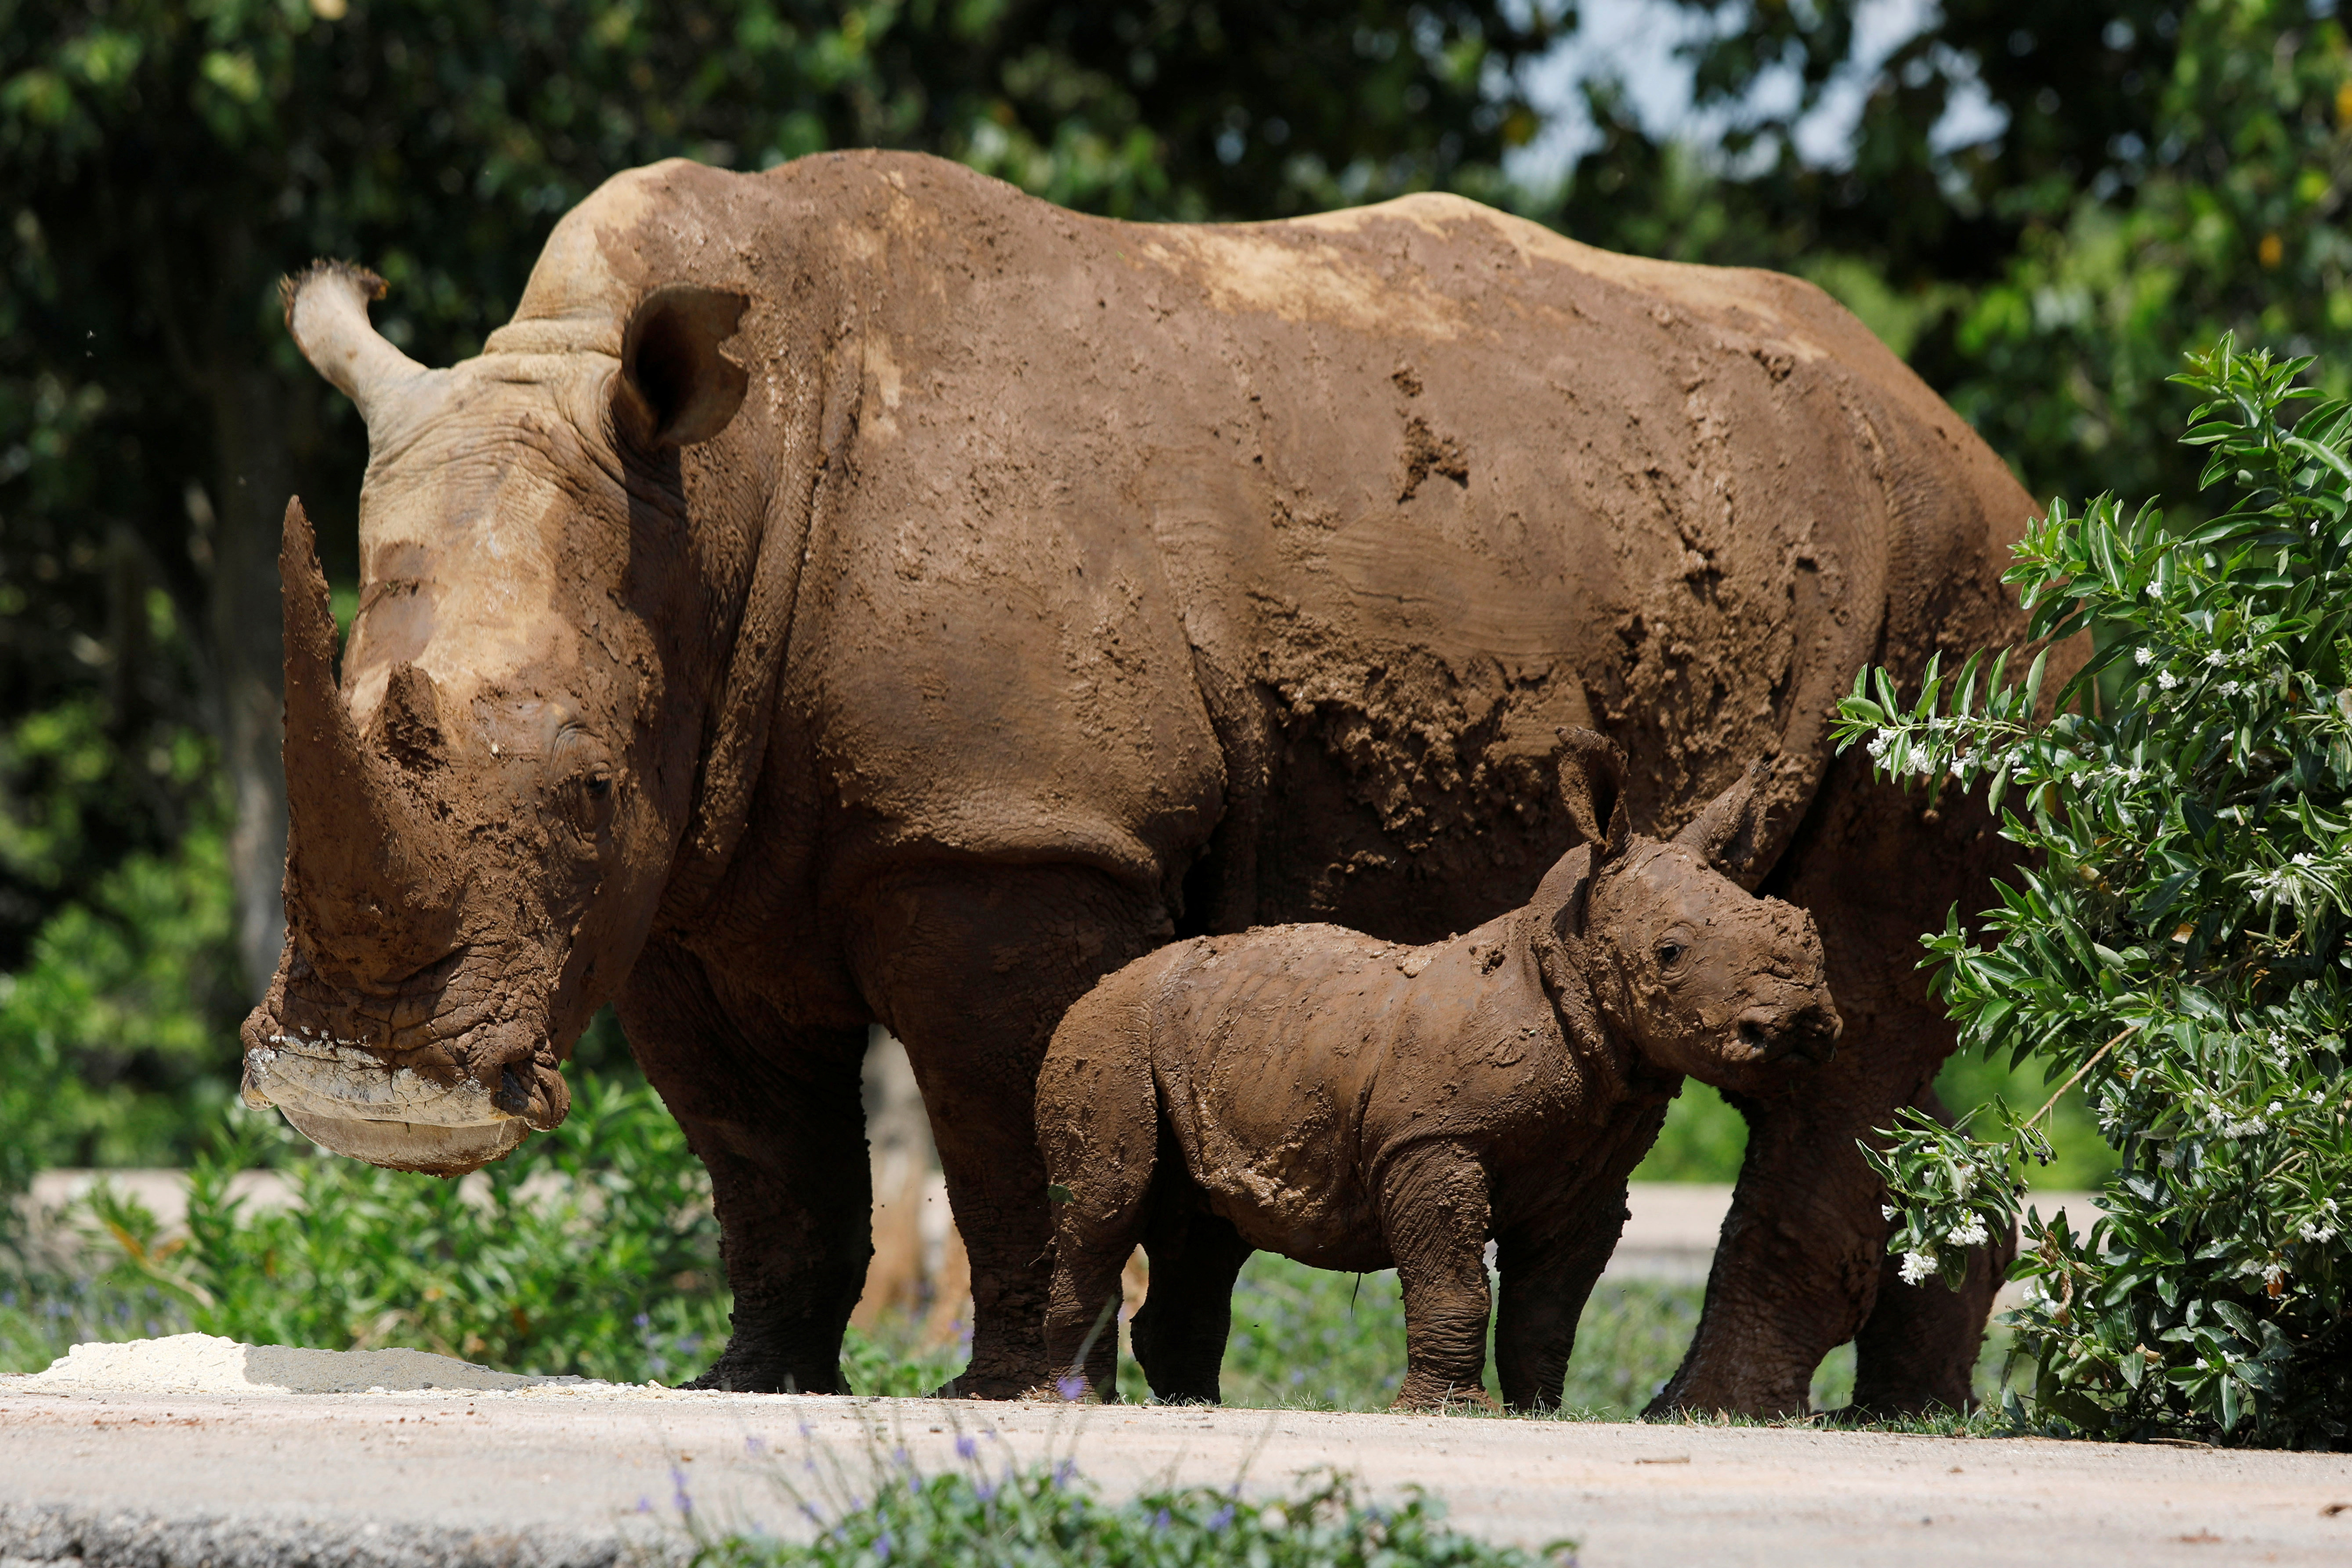 Cuba's National Zoo introduces first white rhinoceros born in the park.